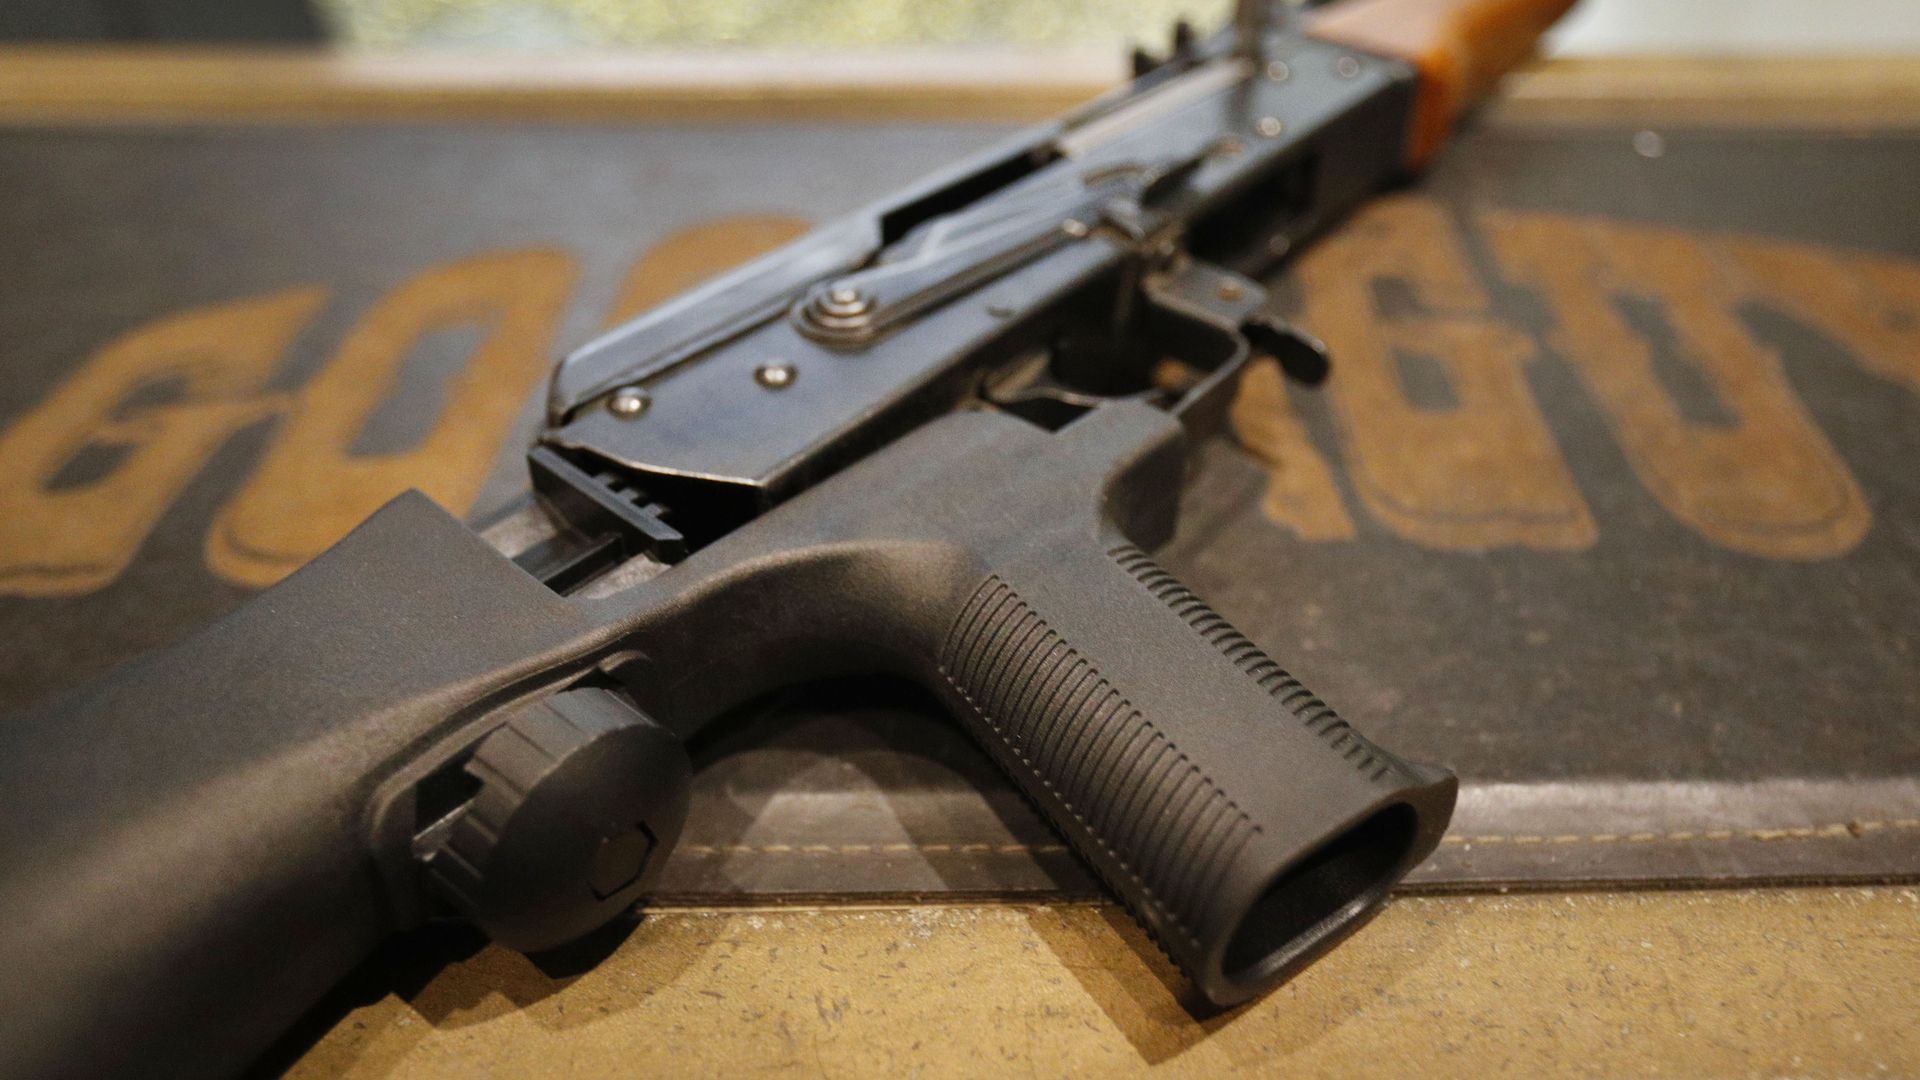 Semi-Automatic Rifles Equipped With Bump Stocks Used At Gun Range